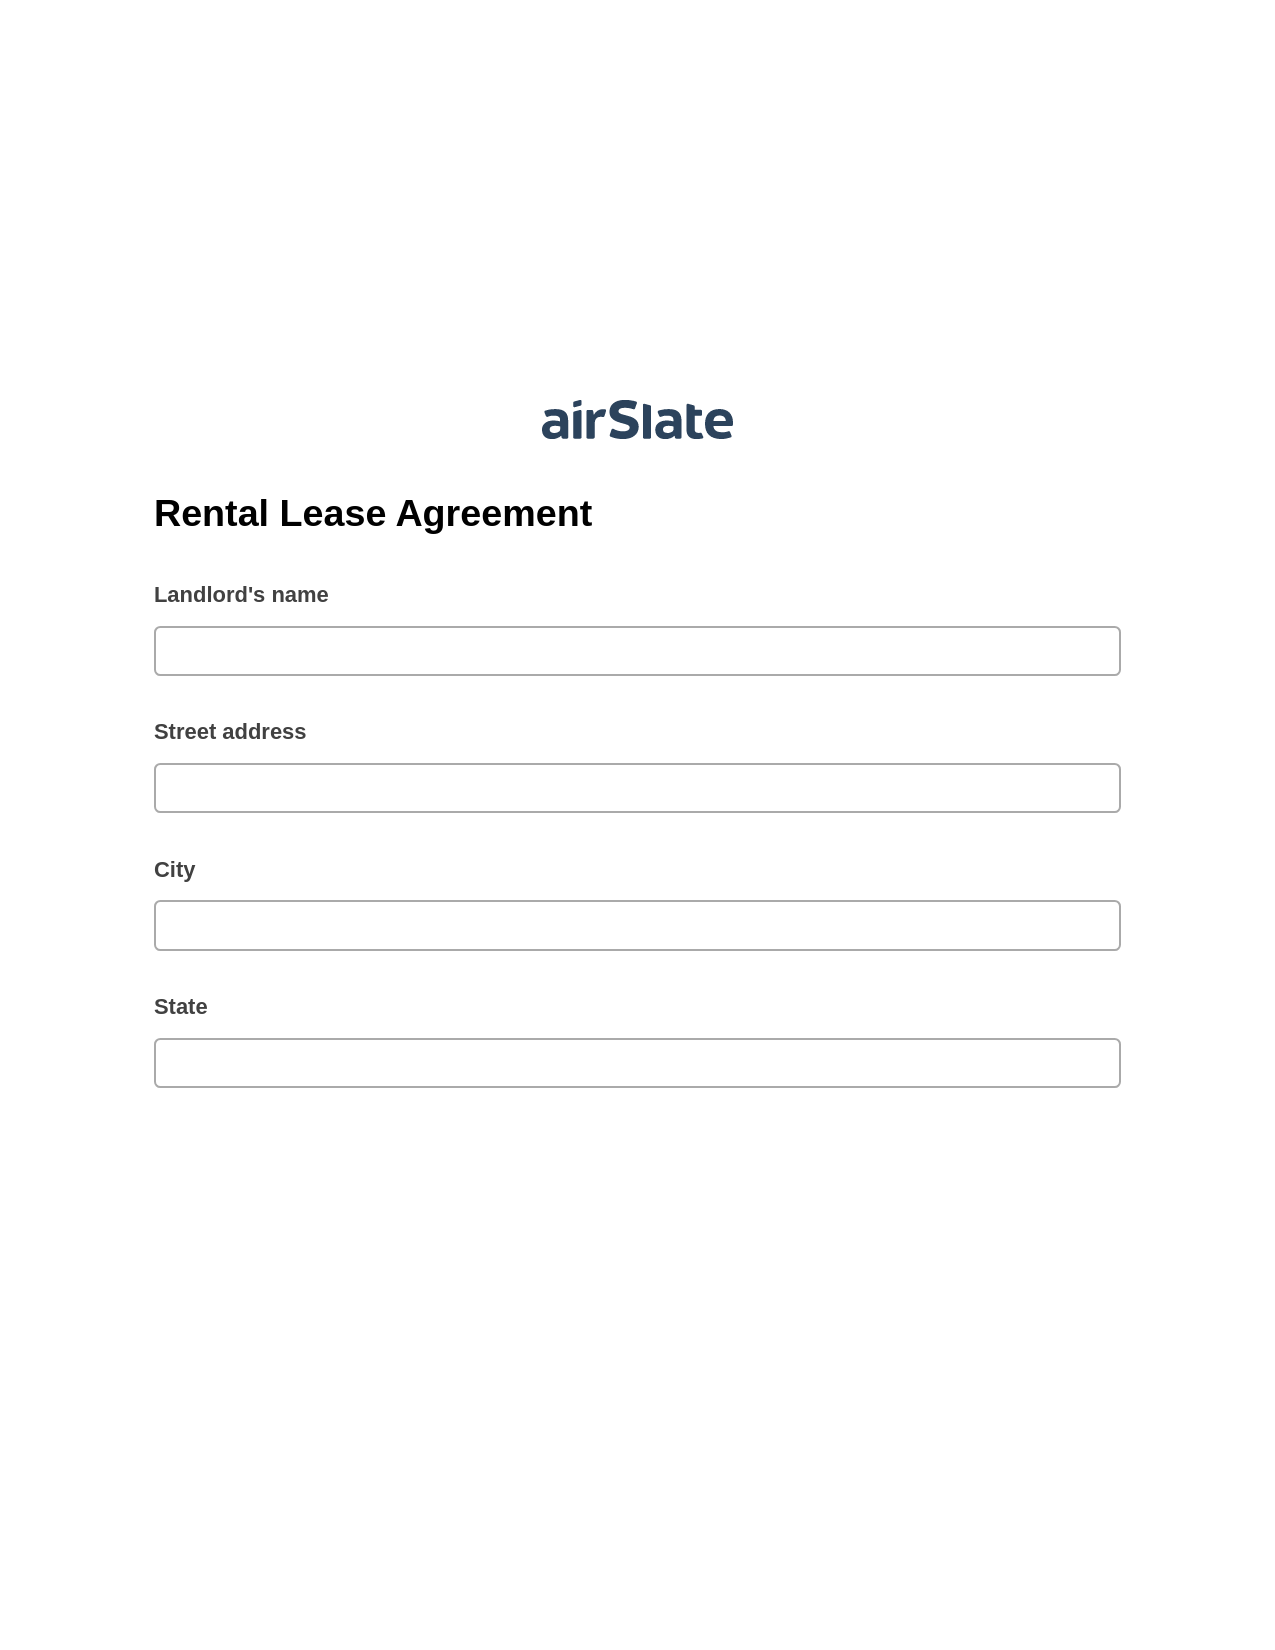 Rental Lease Agreement Pre-fill from Salesforce Records with SOQL Bot, Jira Bot, Post-finish Document Bot